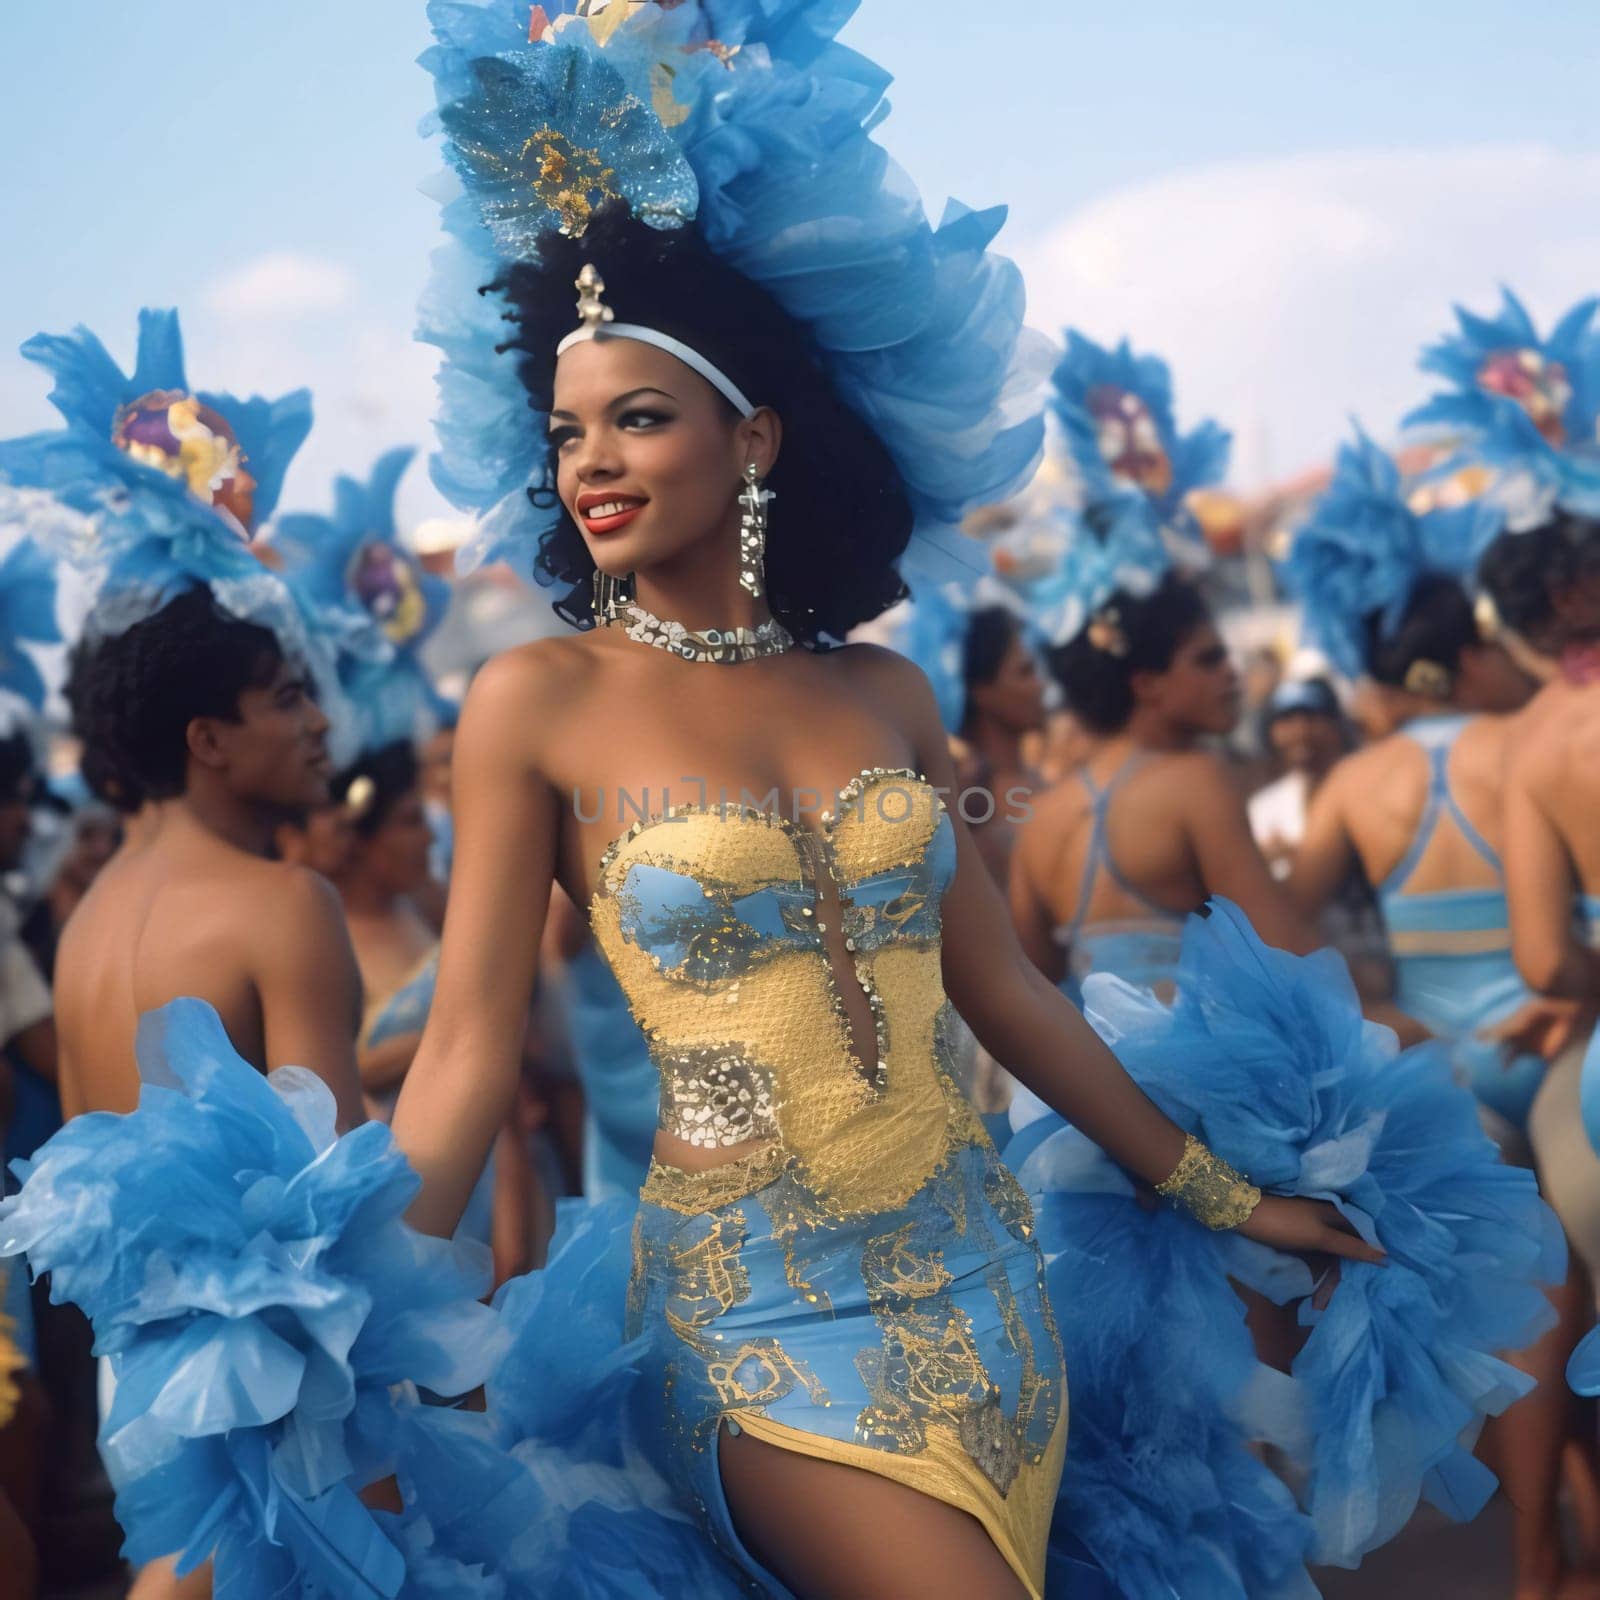 Black half-naked women with blue decorations prepared for a carnival party. Carnival outfits, masks and decorations. A time of fun and celebration before the fast.